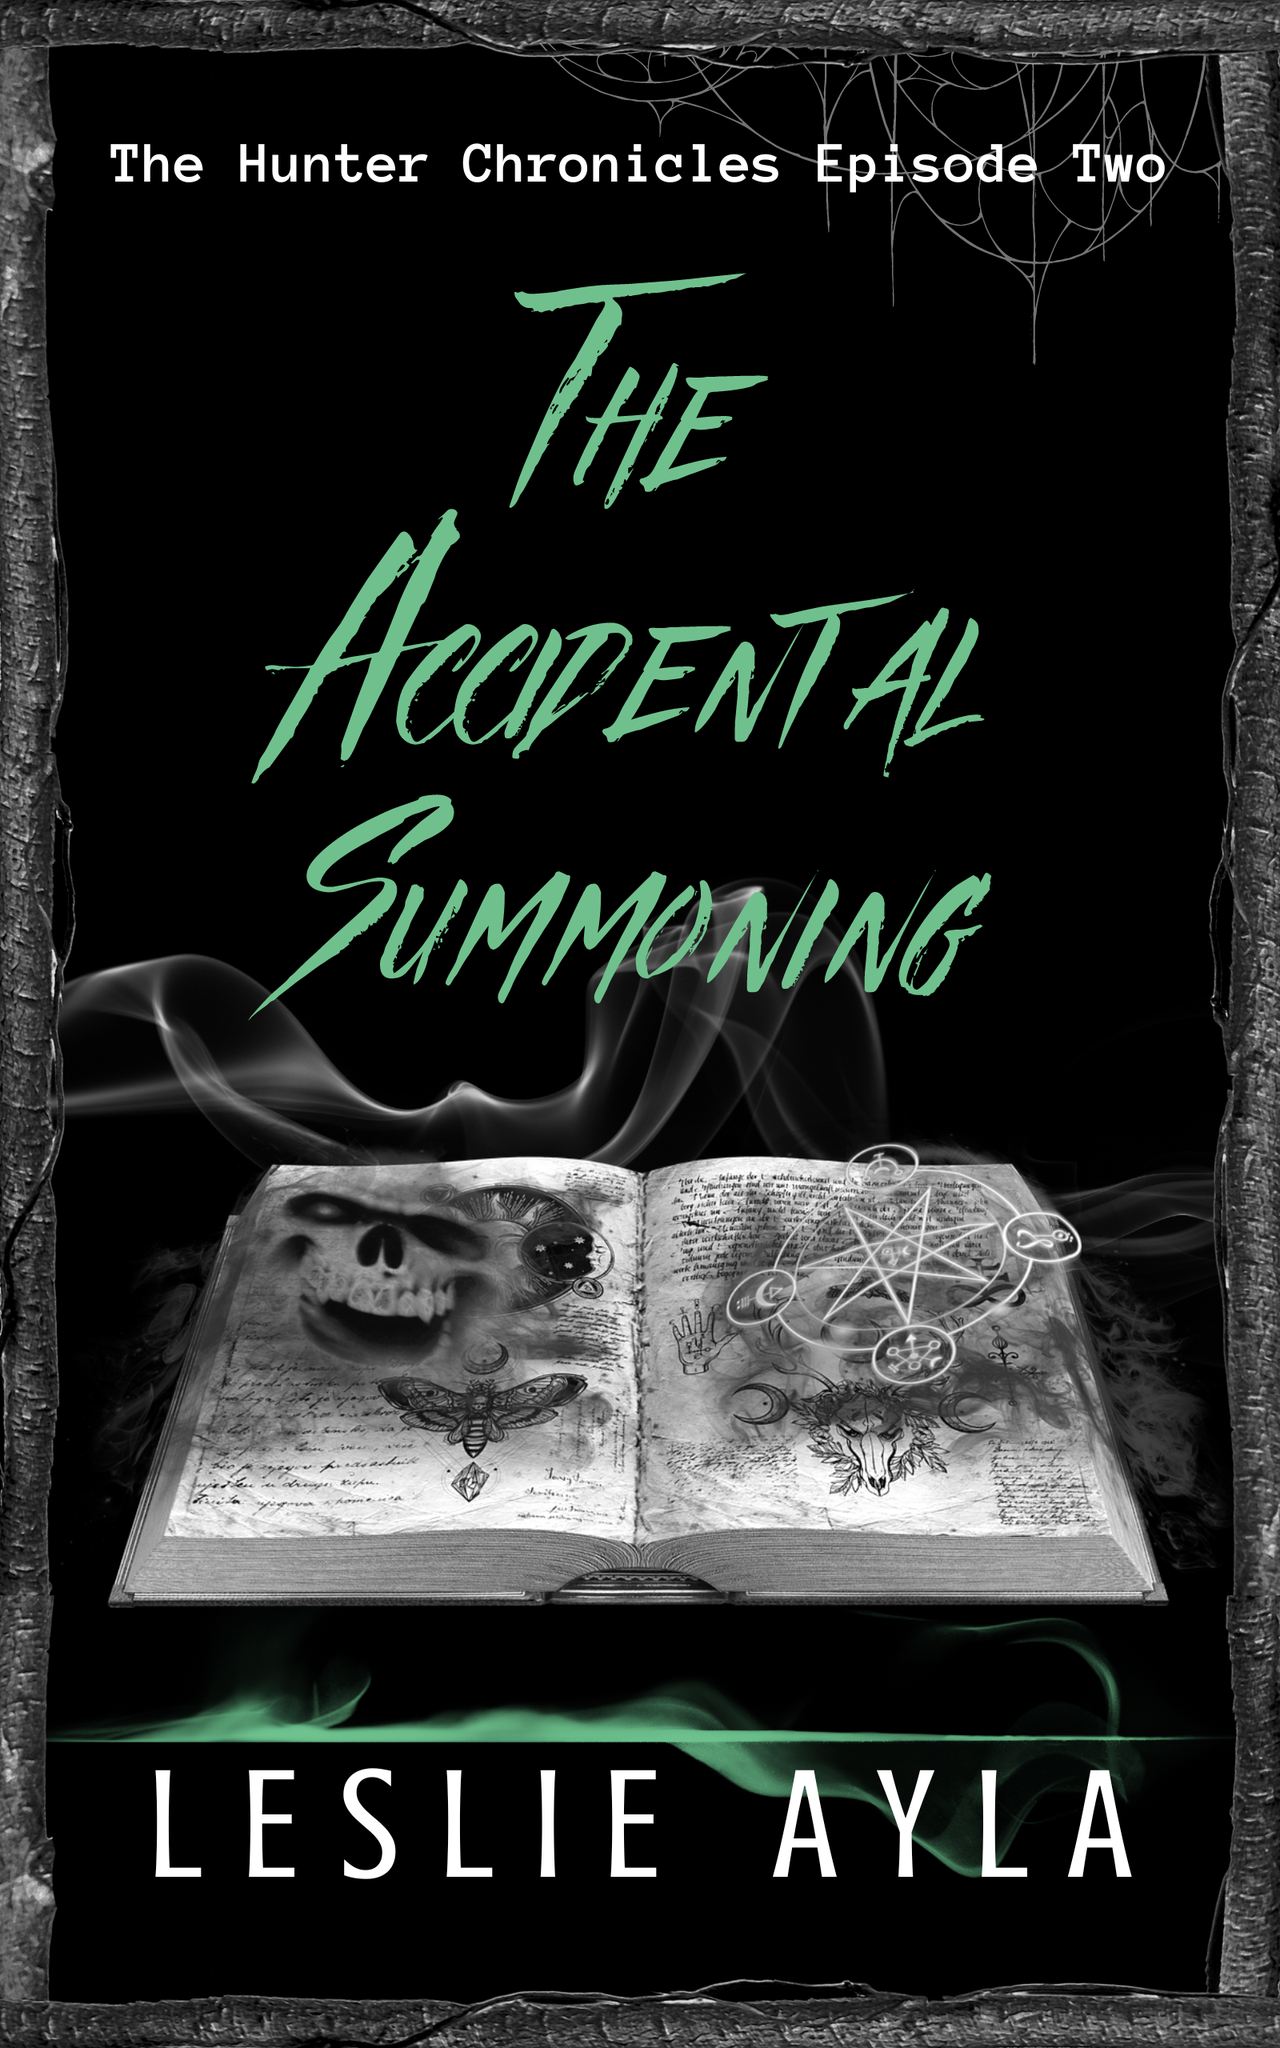 Book Cover: The Accidental Summoning by Leslie Ayla